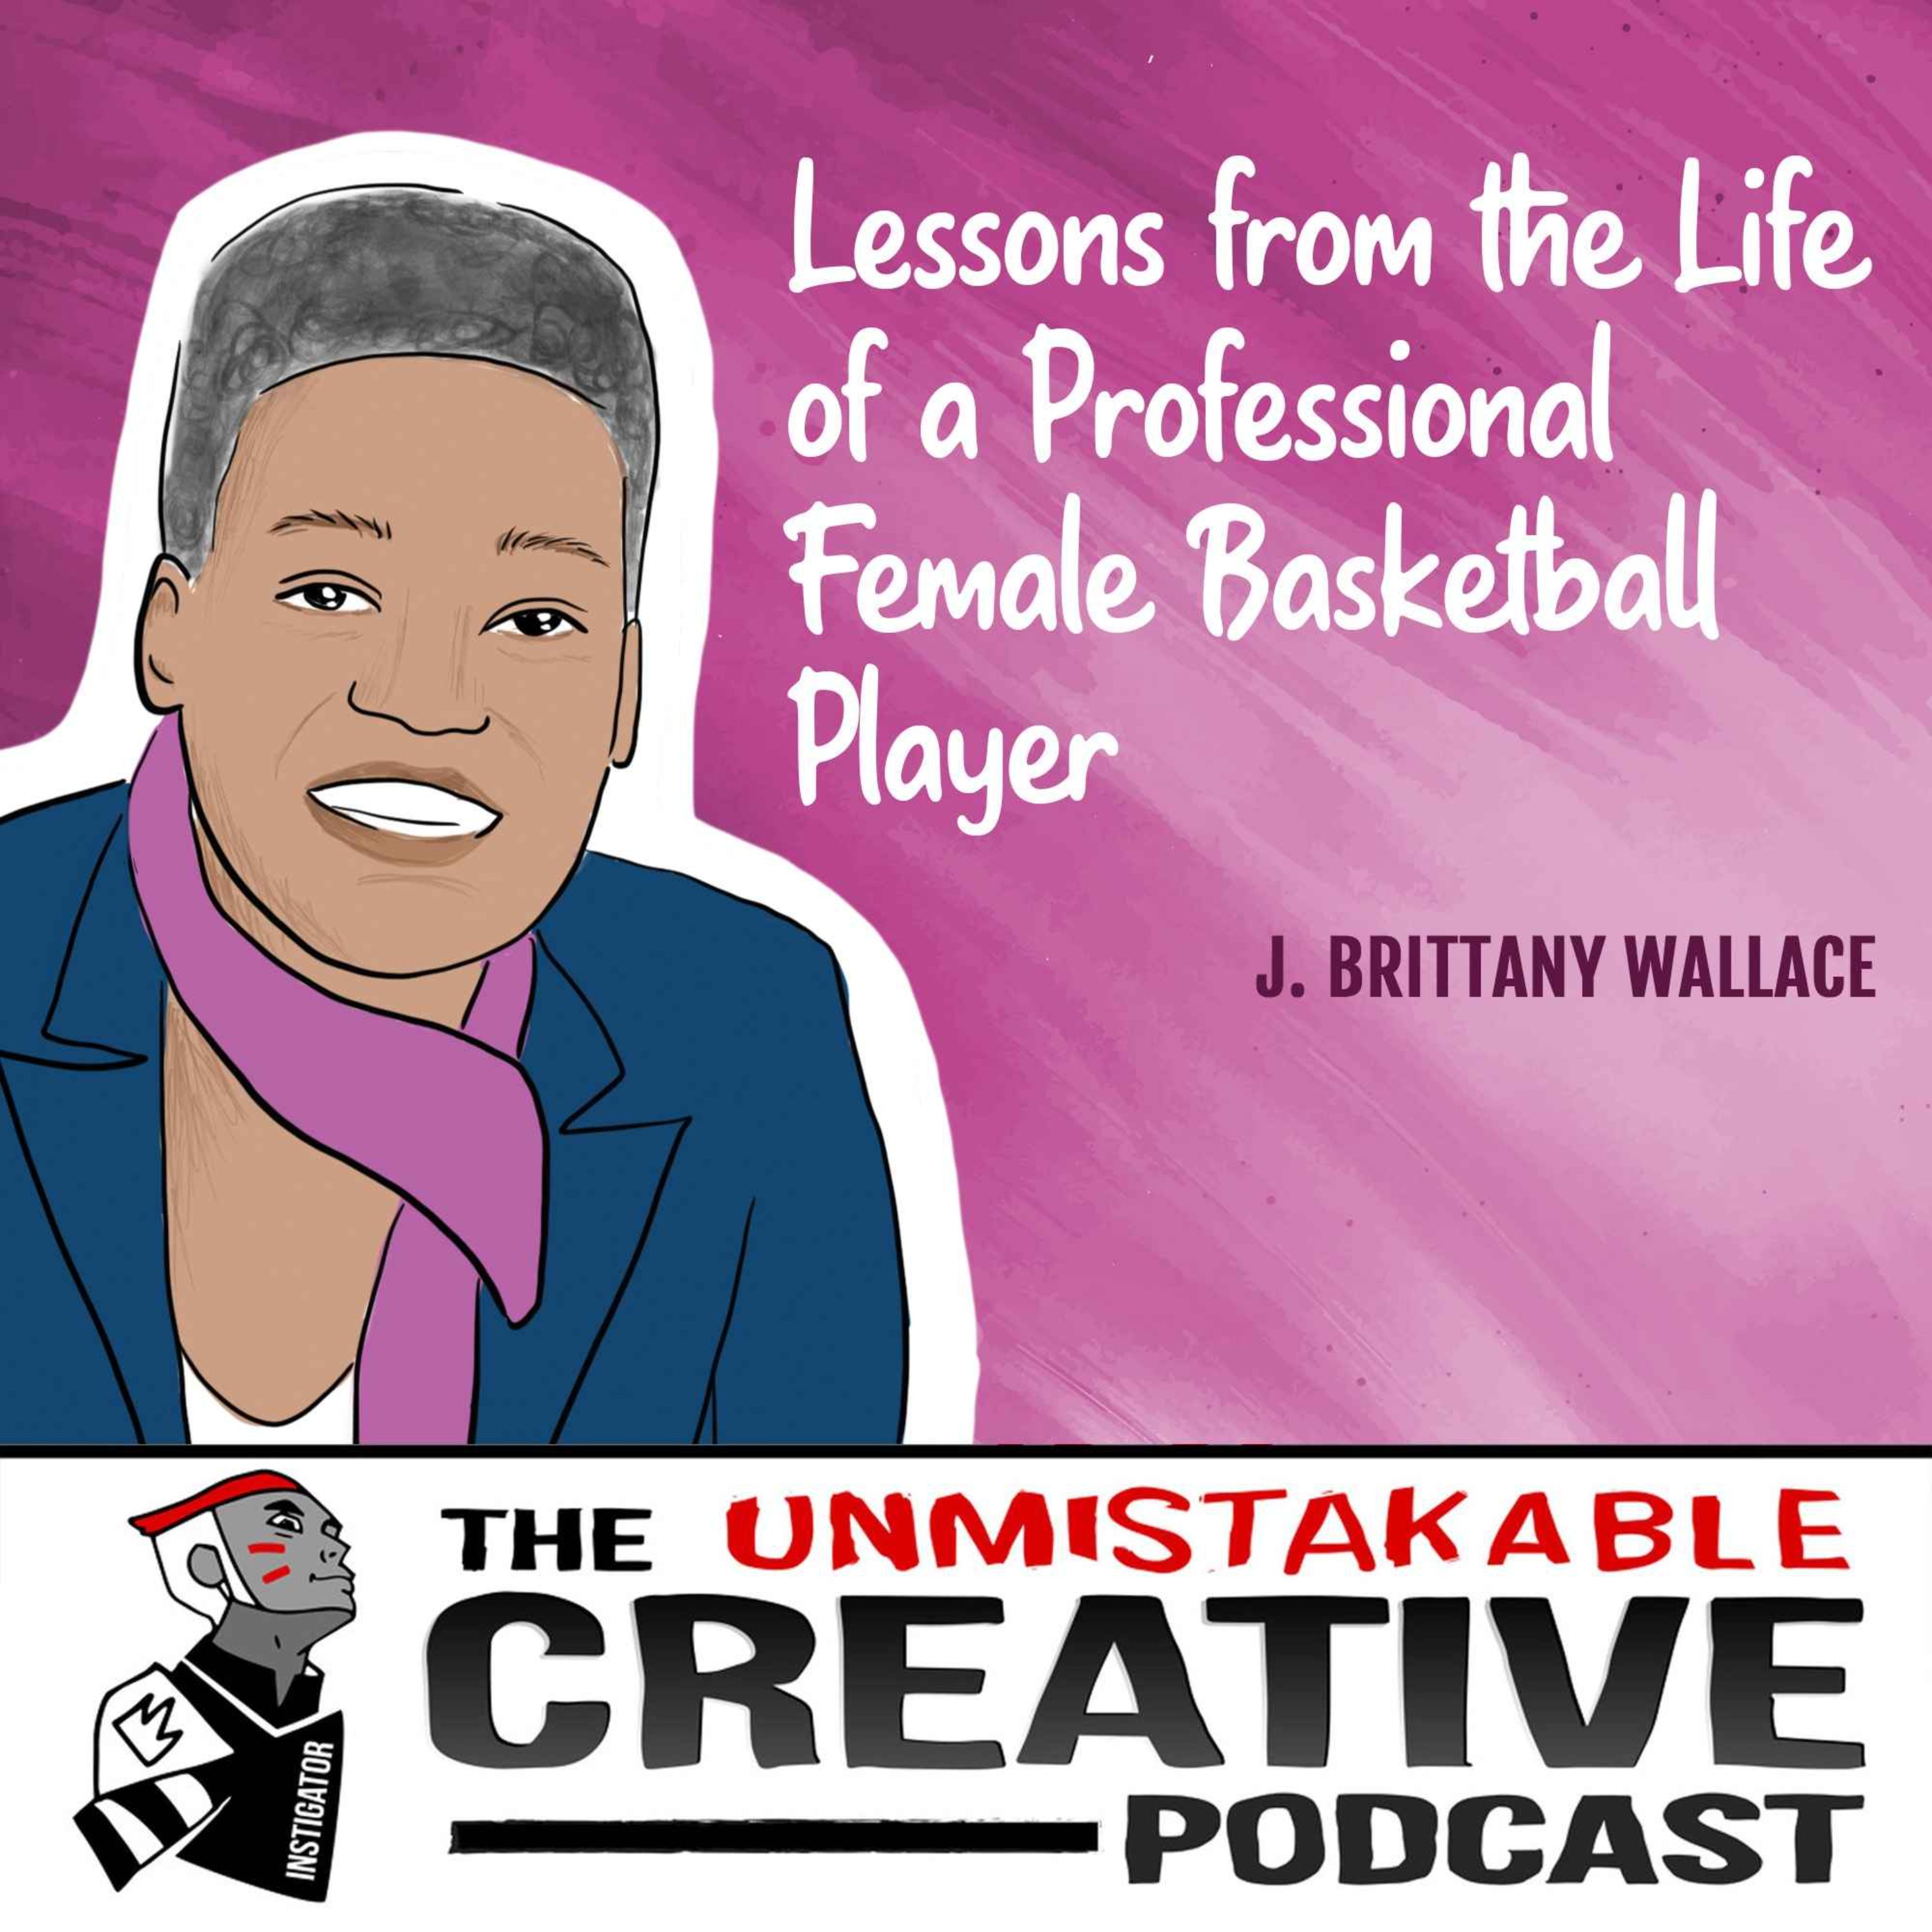 J. Brittany Wallace | Lessons from the Life of a Professional Female Basketball Player